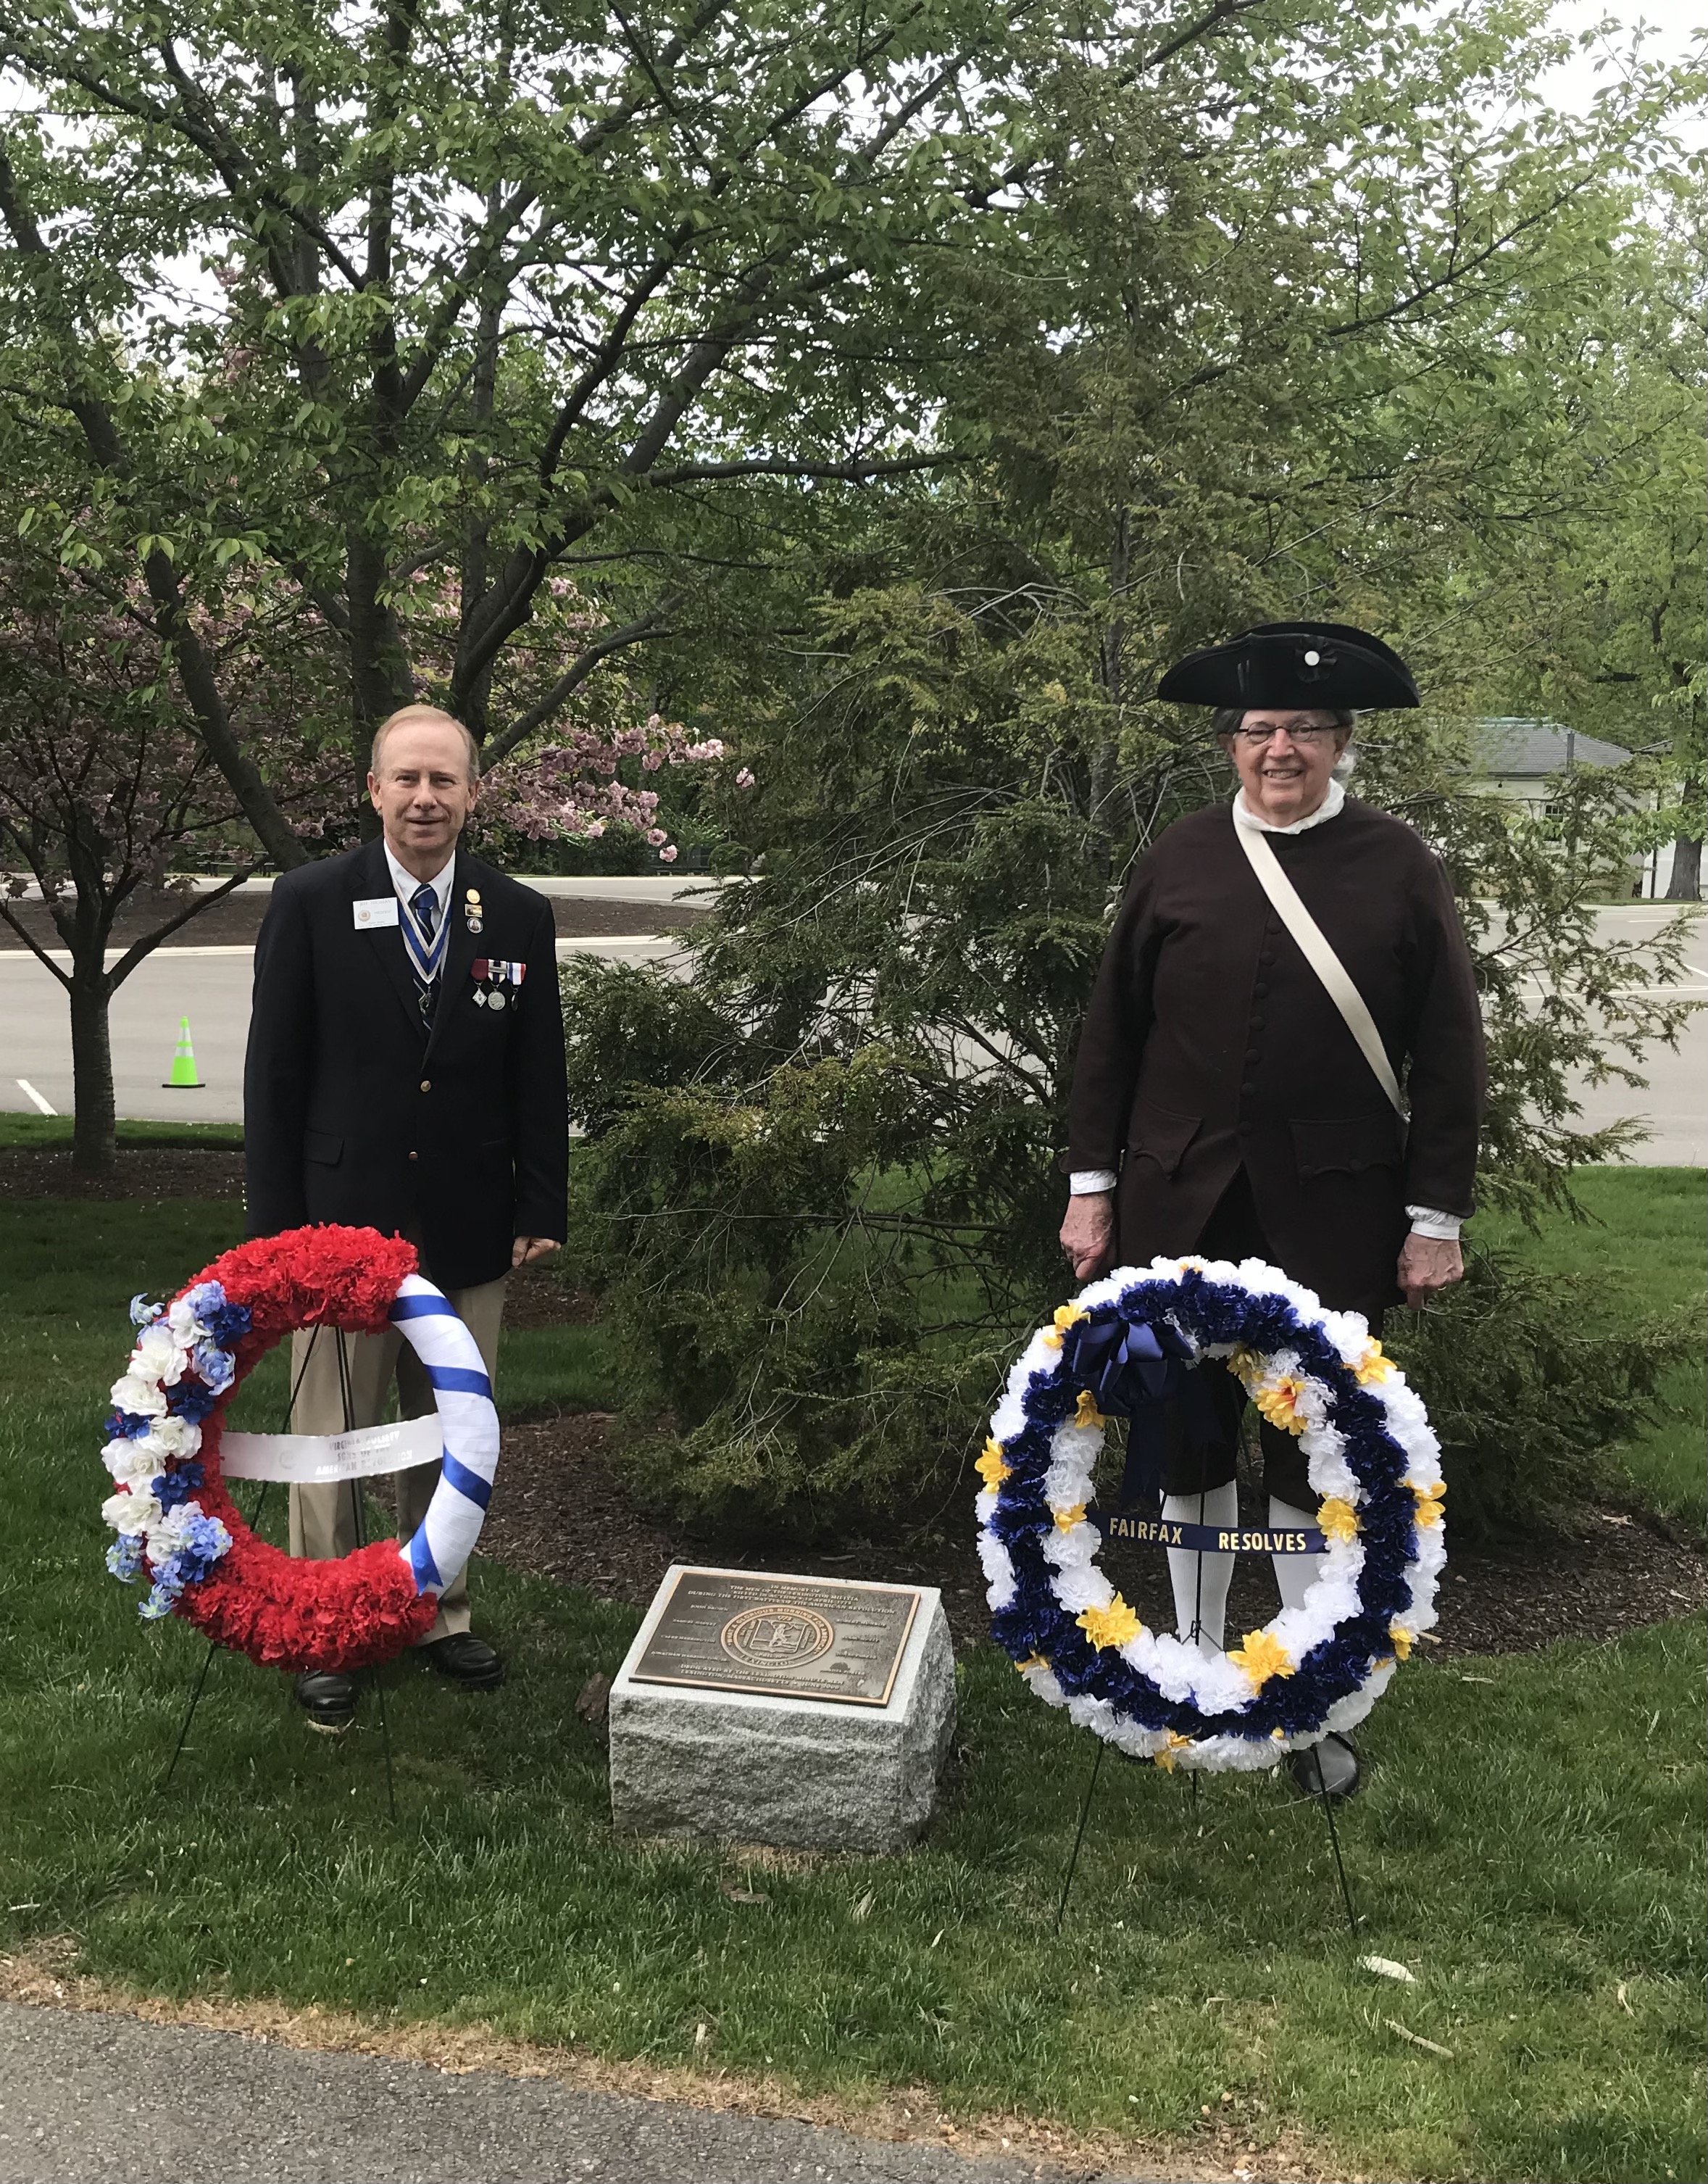 Compatriot Jeff Thomas, President, Virginia Society, Sons of the American Revolution, and Compatriot Dave Cook, President, Fairfax Resolves Chapter, present wreaths at the Lexington Minutemen Memorial at Arlington National Cemetery during the Patriots’ Day commemoration April 18.